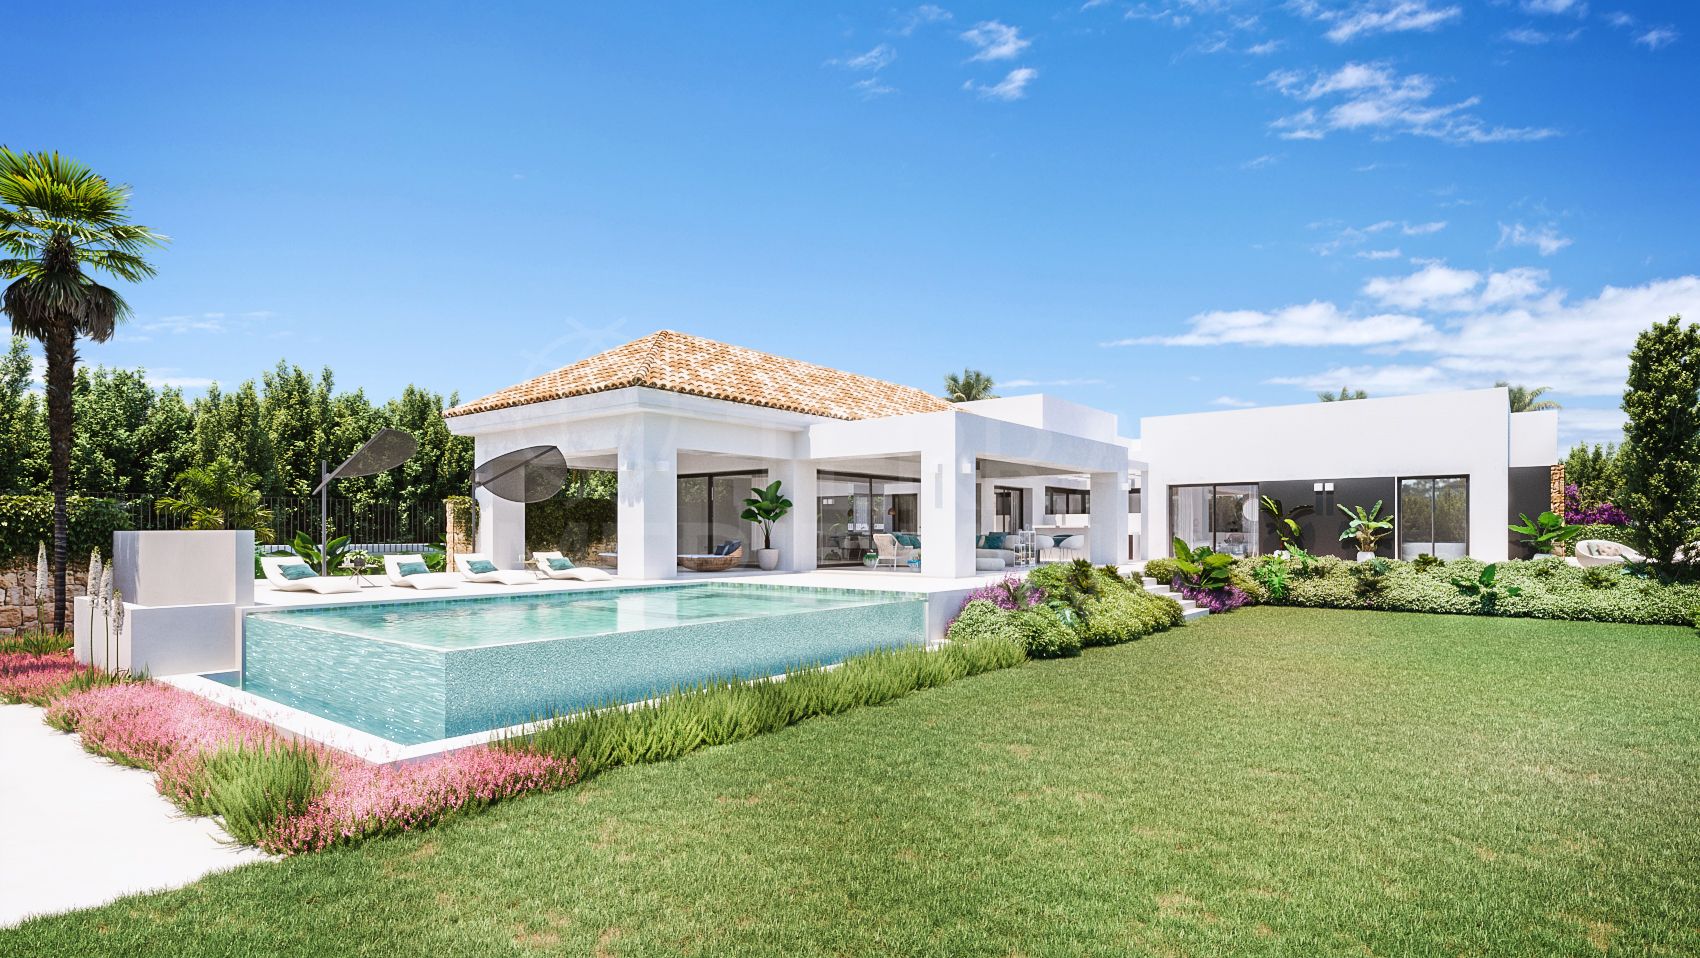 Stunning new Mediterranean-style villa with outdoor oasis for sale in Bel Air, Estepona